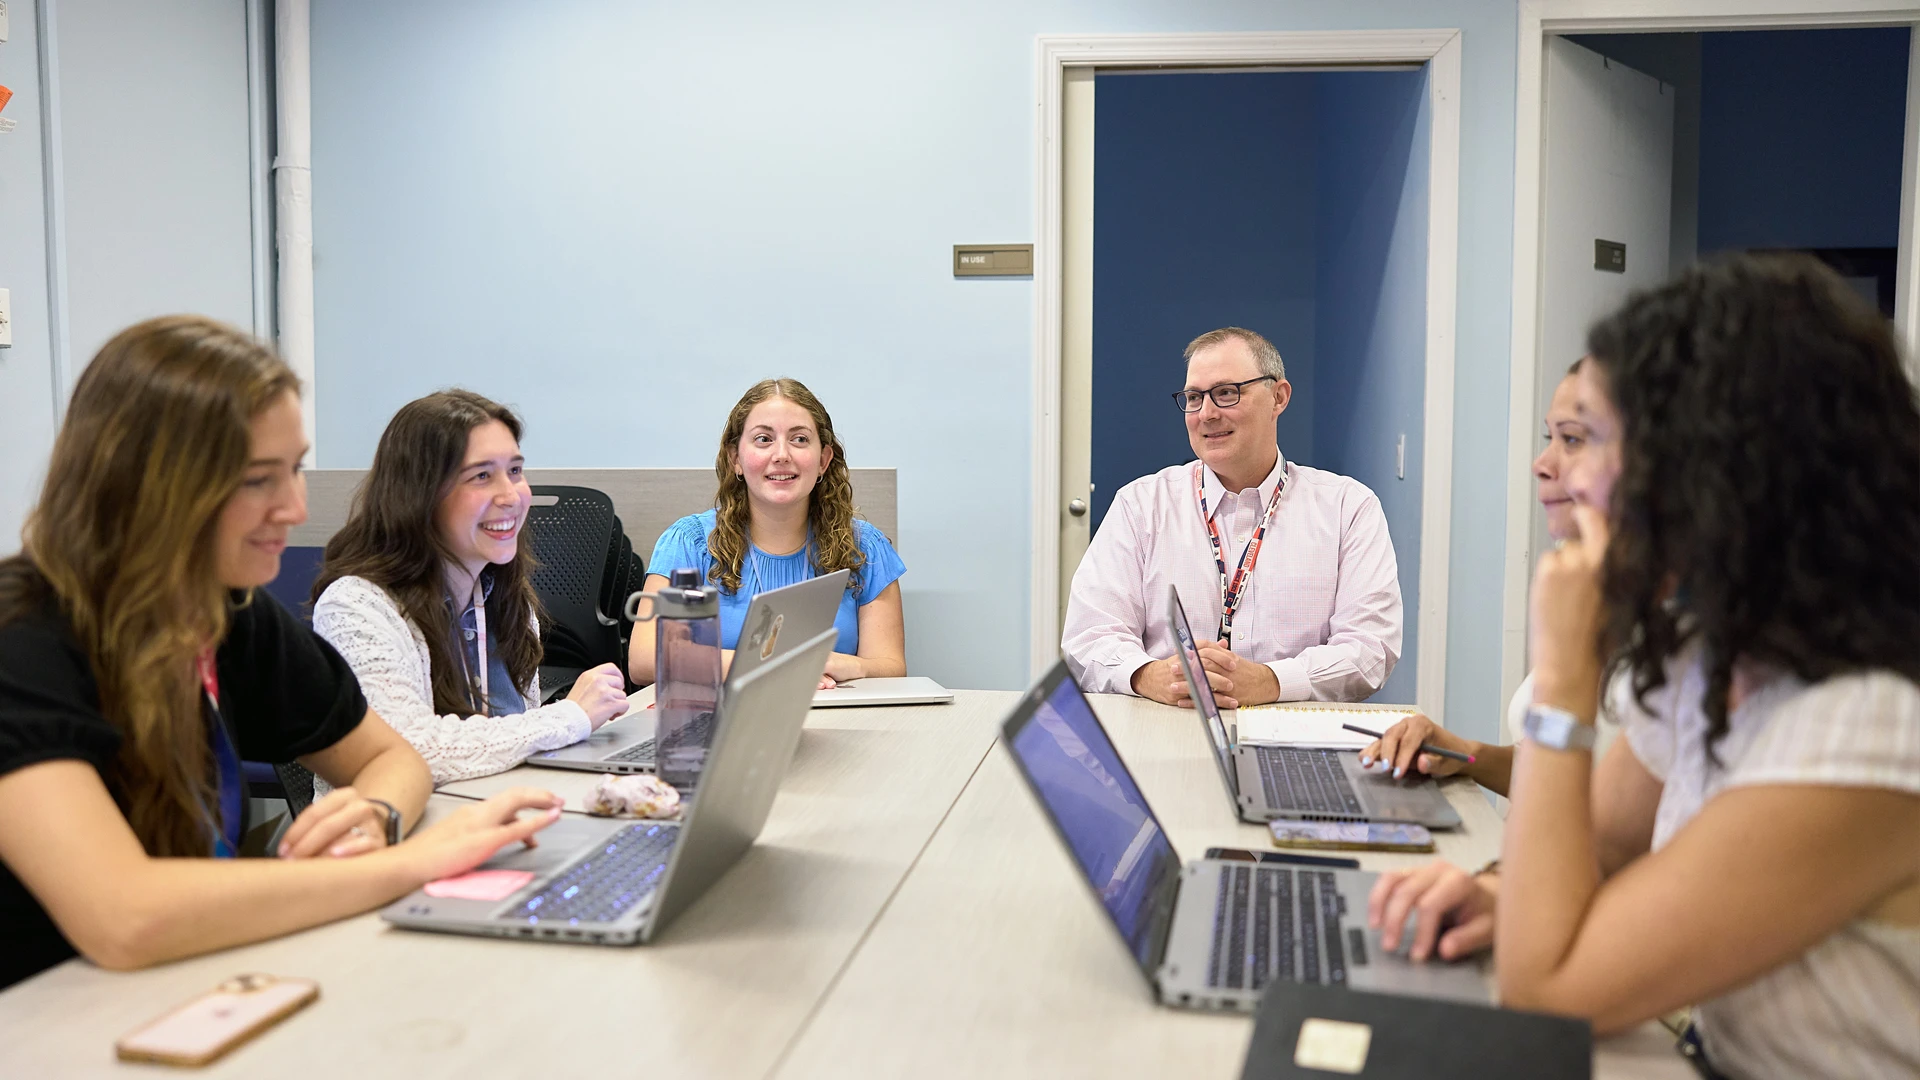 Under the leadership of Thomas Hildebrandt, PsyD (fourth from left), staff and experts at the Center of Excellence for Eating and Weight Disorders conduct research and treat youths.